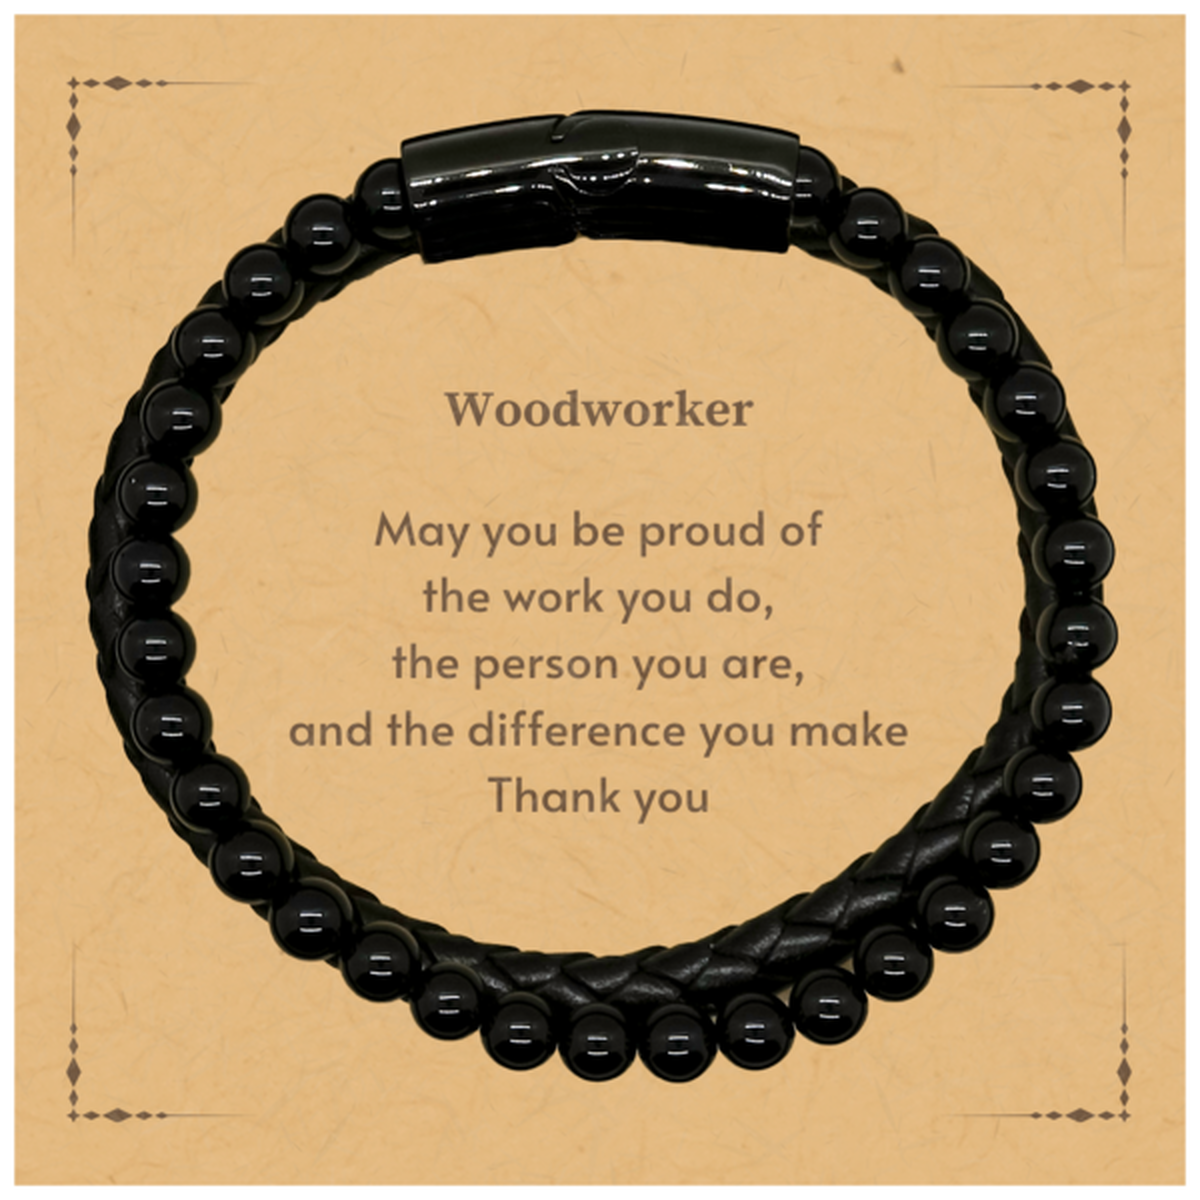 Heartwarming Stone Leather Bracelets Retirement Coworkers Gifts for Woodworker, Woodworker May You be proud of the work you do, the person you are Gifts for Boss Men Women Friends